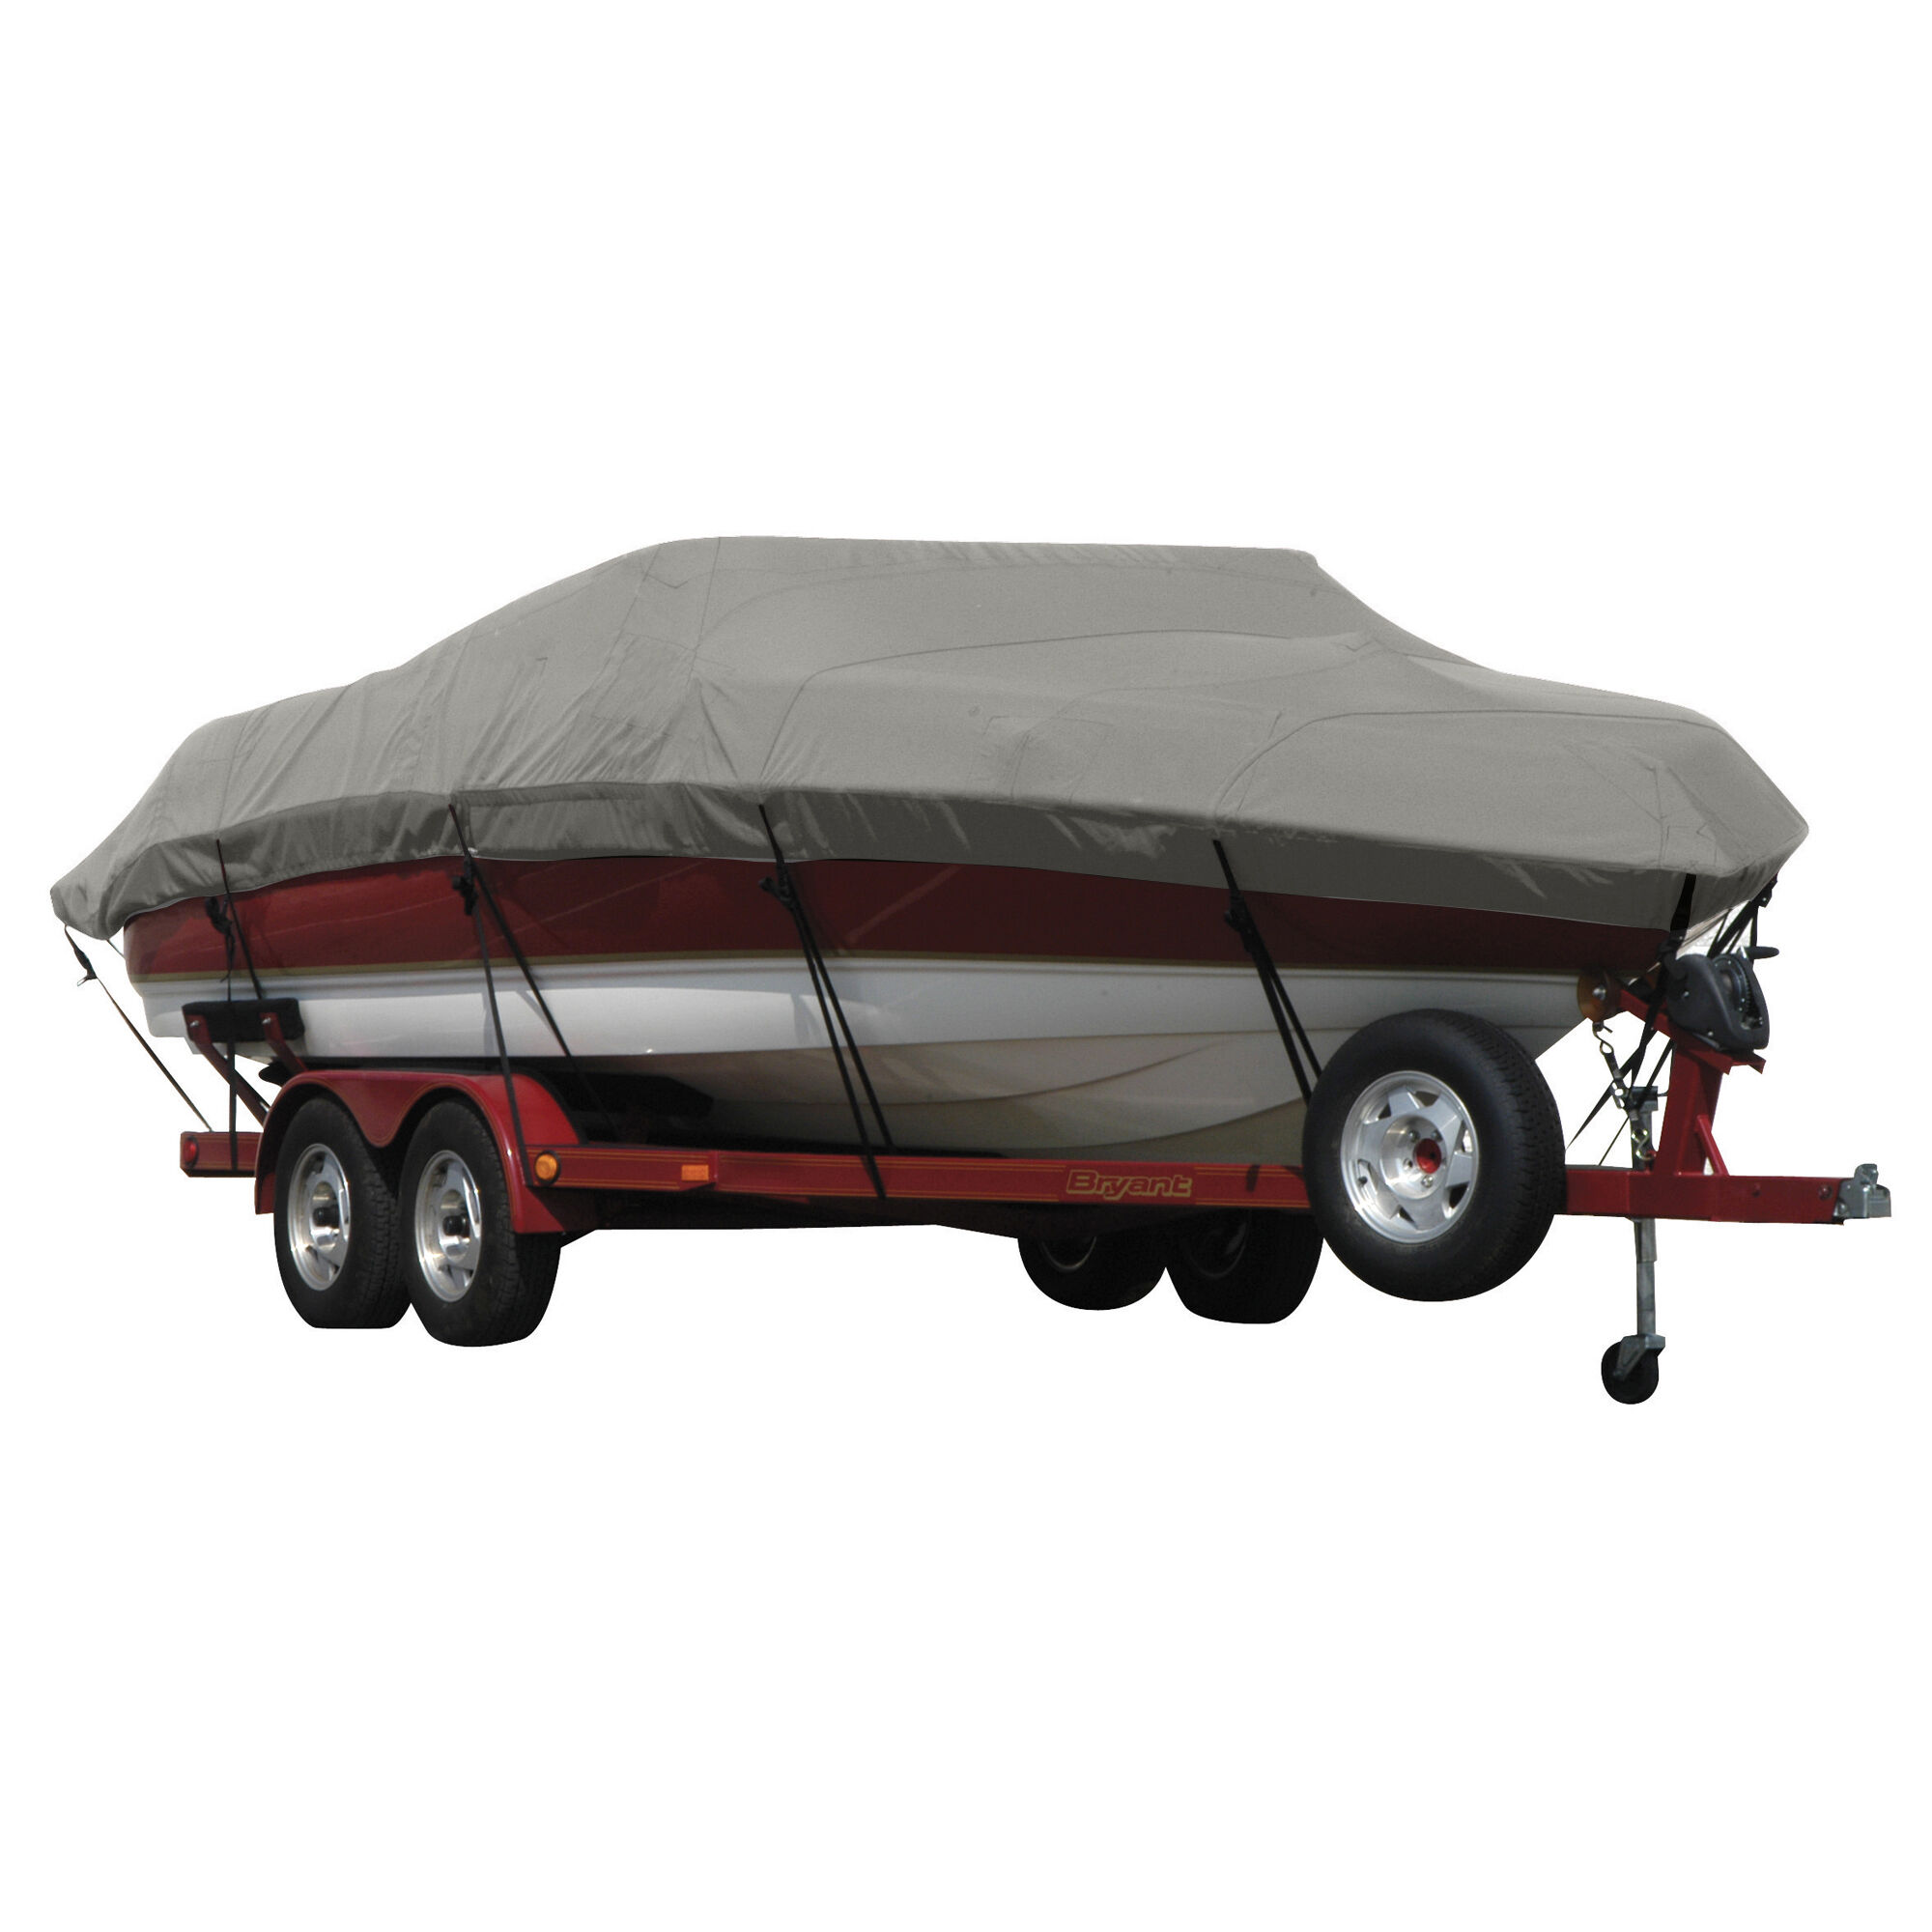 Covermate Exact Fit Sunbrella Boat Cover for Campion Chase 580 Zri/Zricd Chase 580 Zri/Zricd I/O. Charcoal Grey Heather in Charcoal Grey Heather